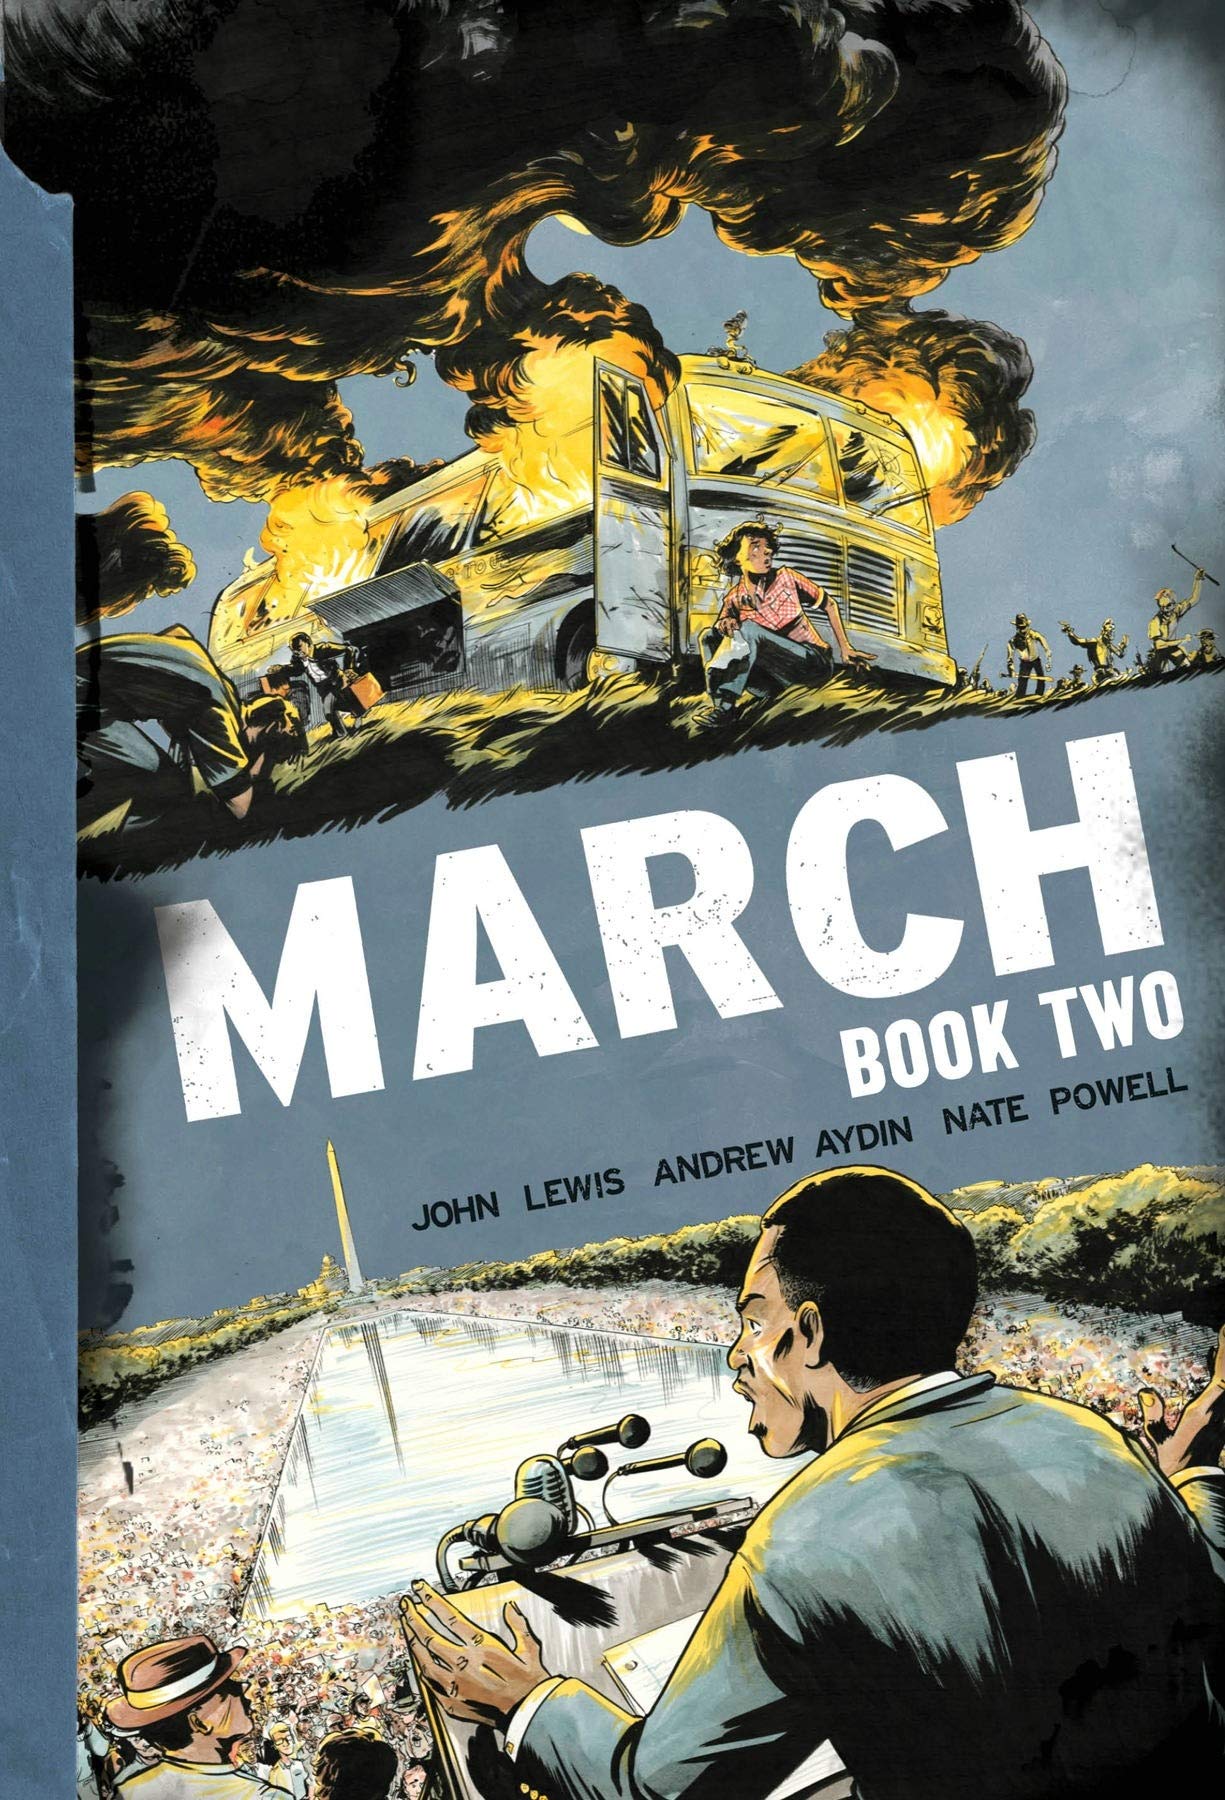 March Book Two by John Lewis